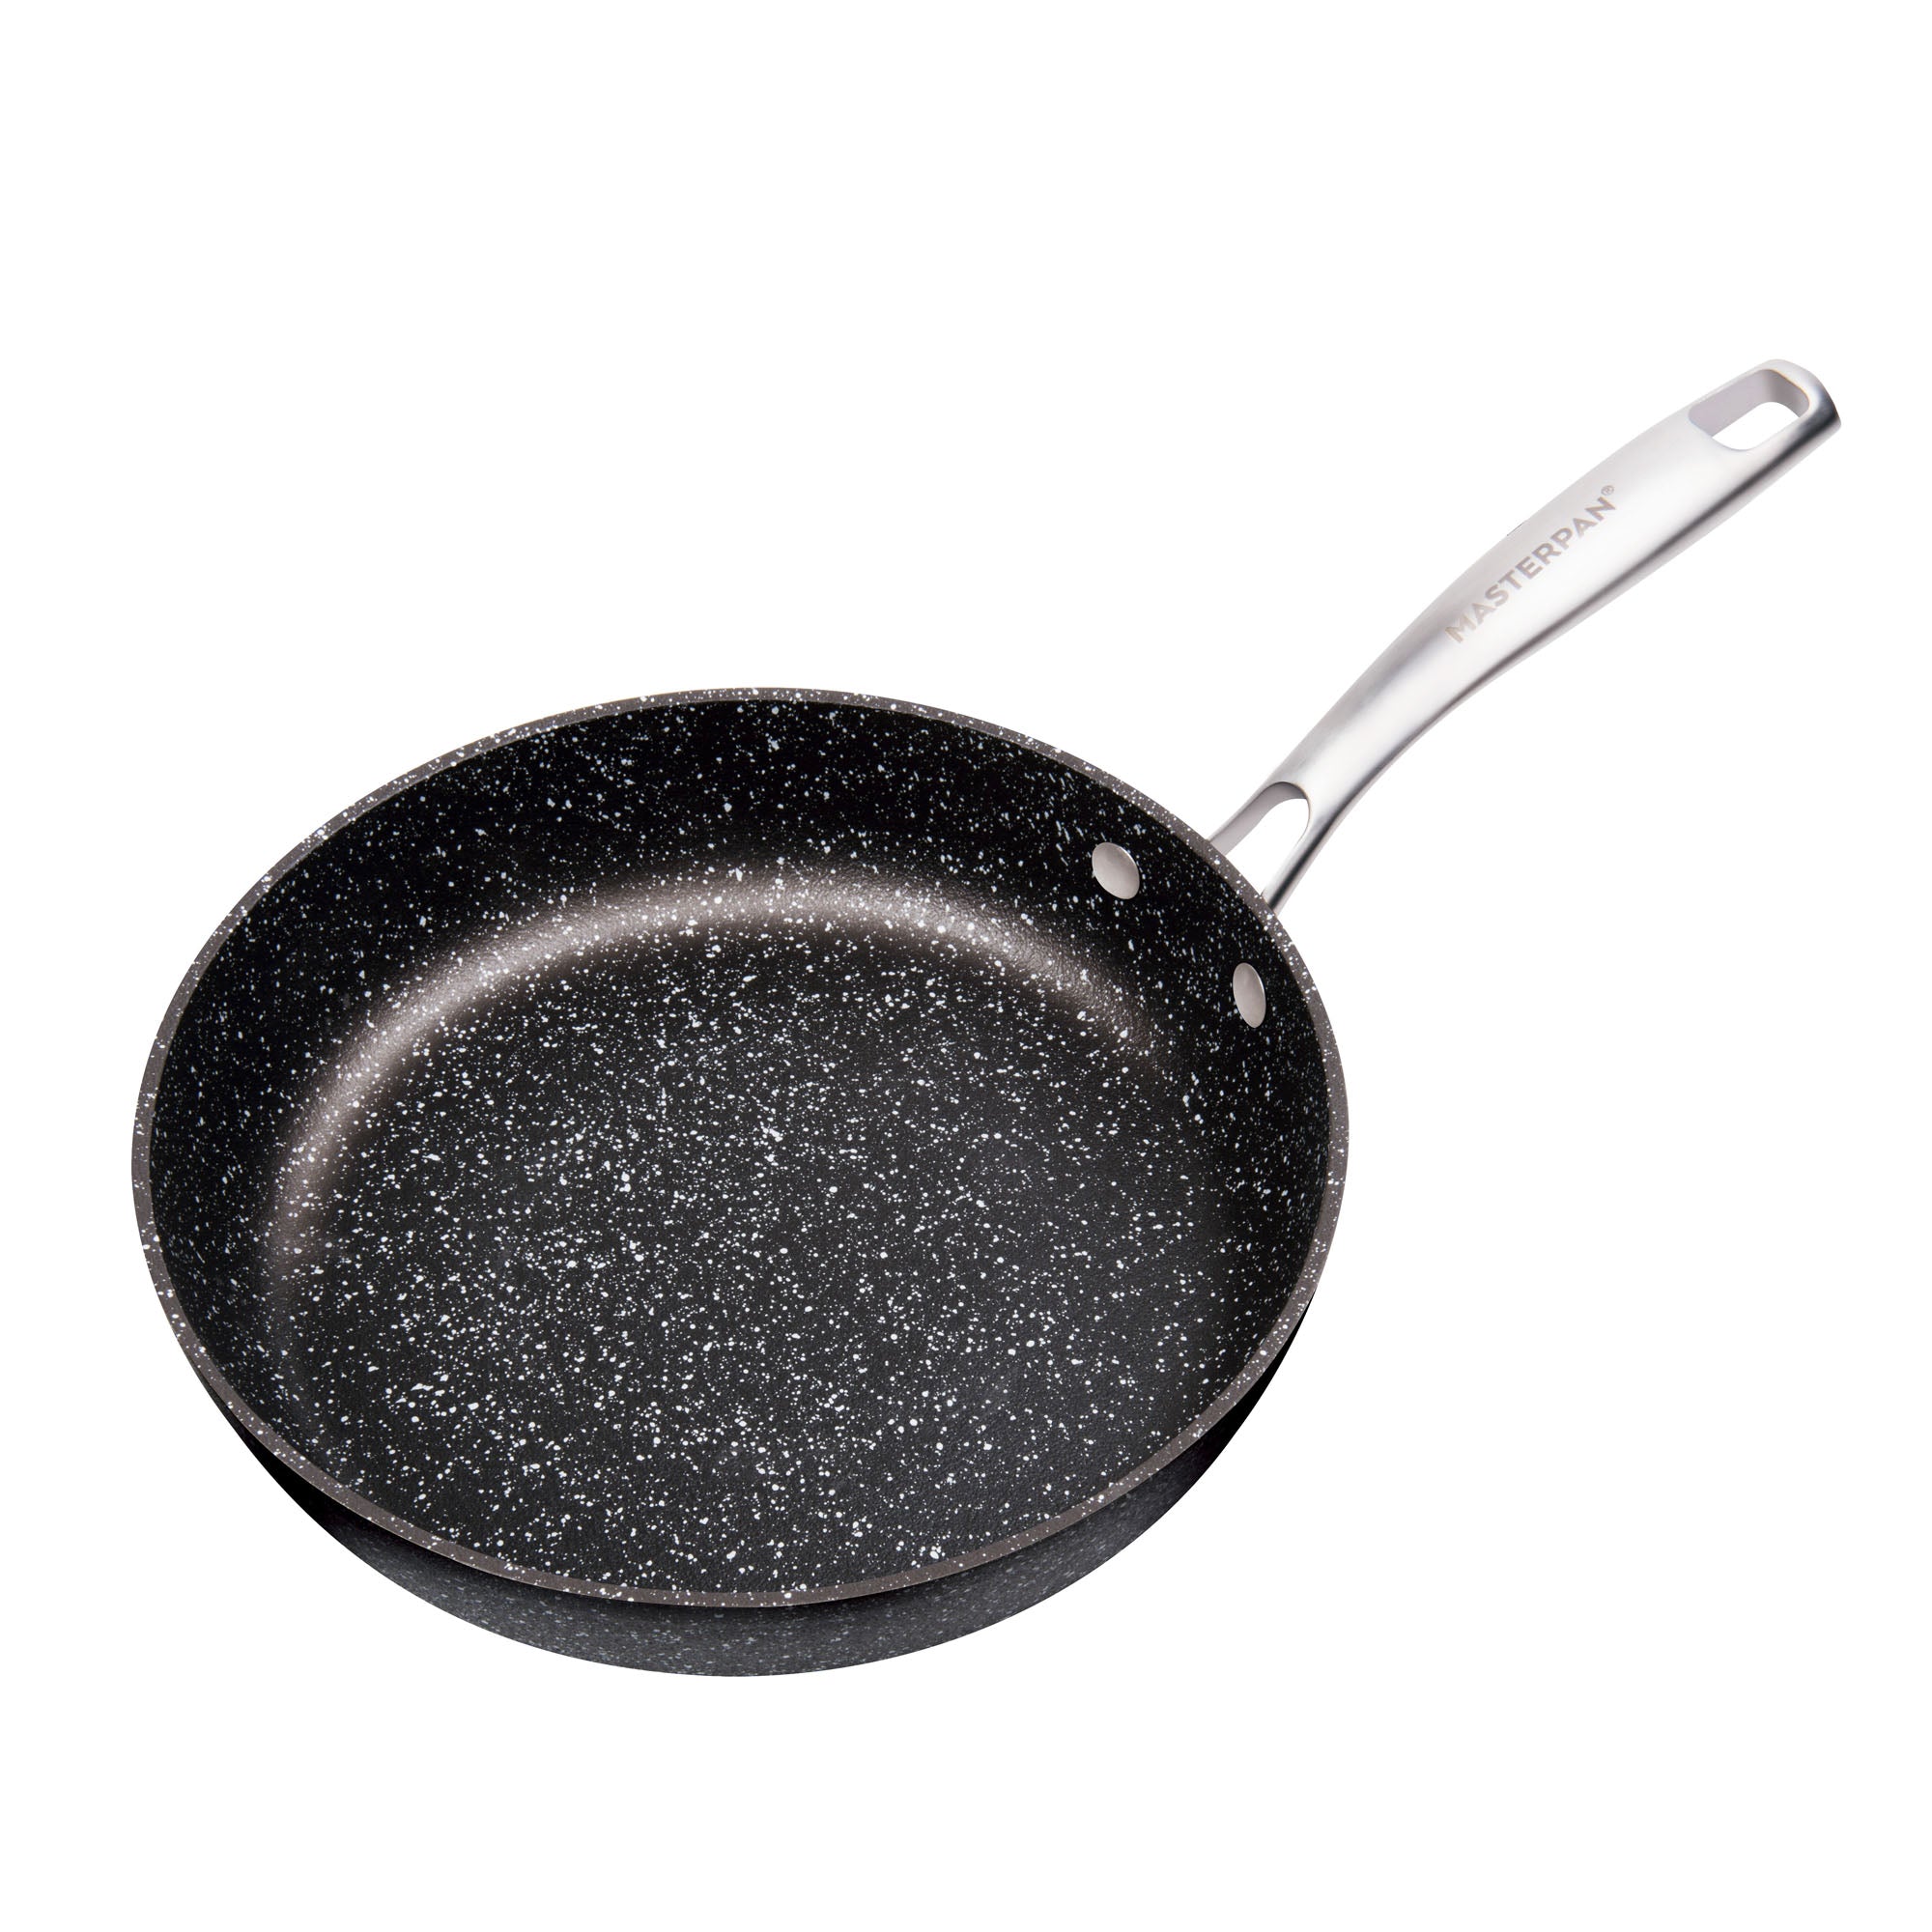 CHEFMADE Carbon Steel Non Stick 6.1'' Crepe Pan & Reviews